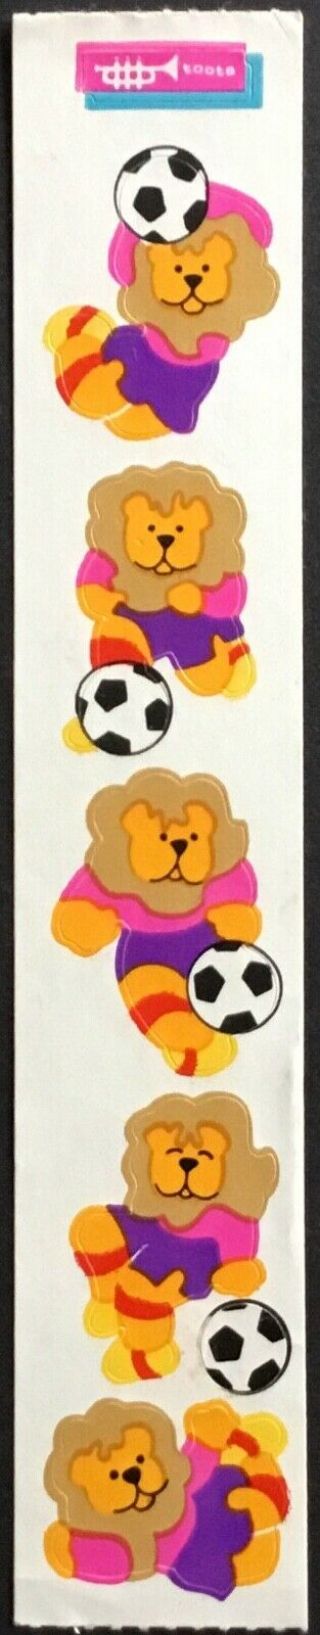 Vintage Stickers - Cardesign Toots - Soccer Lions - Dated 1984